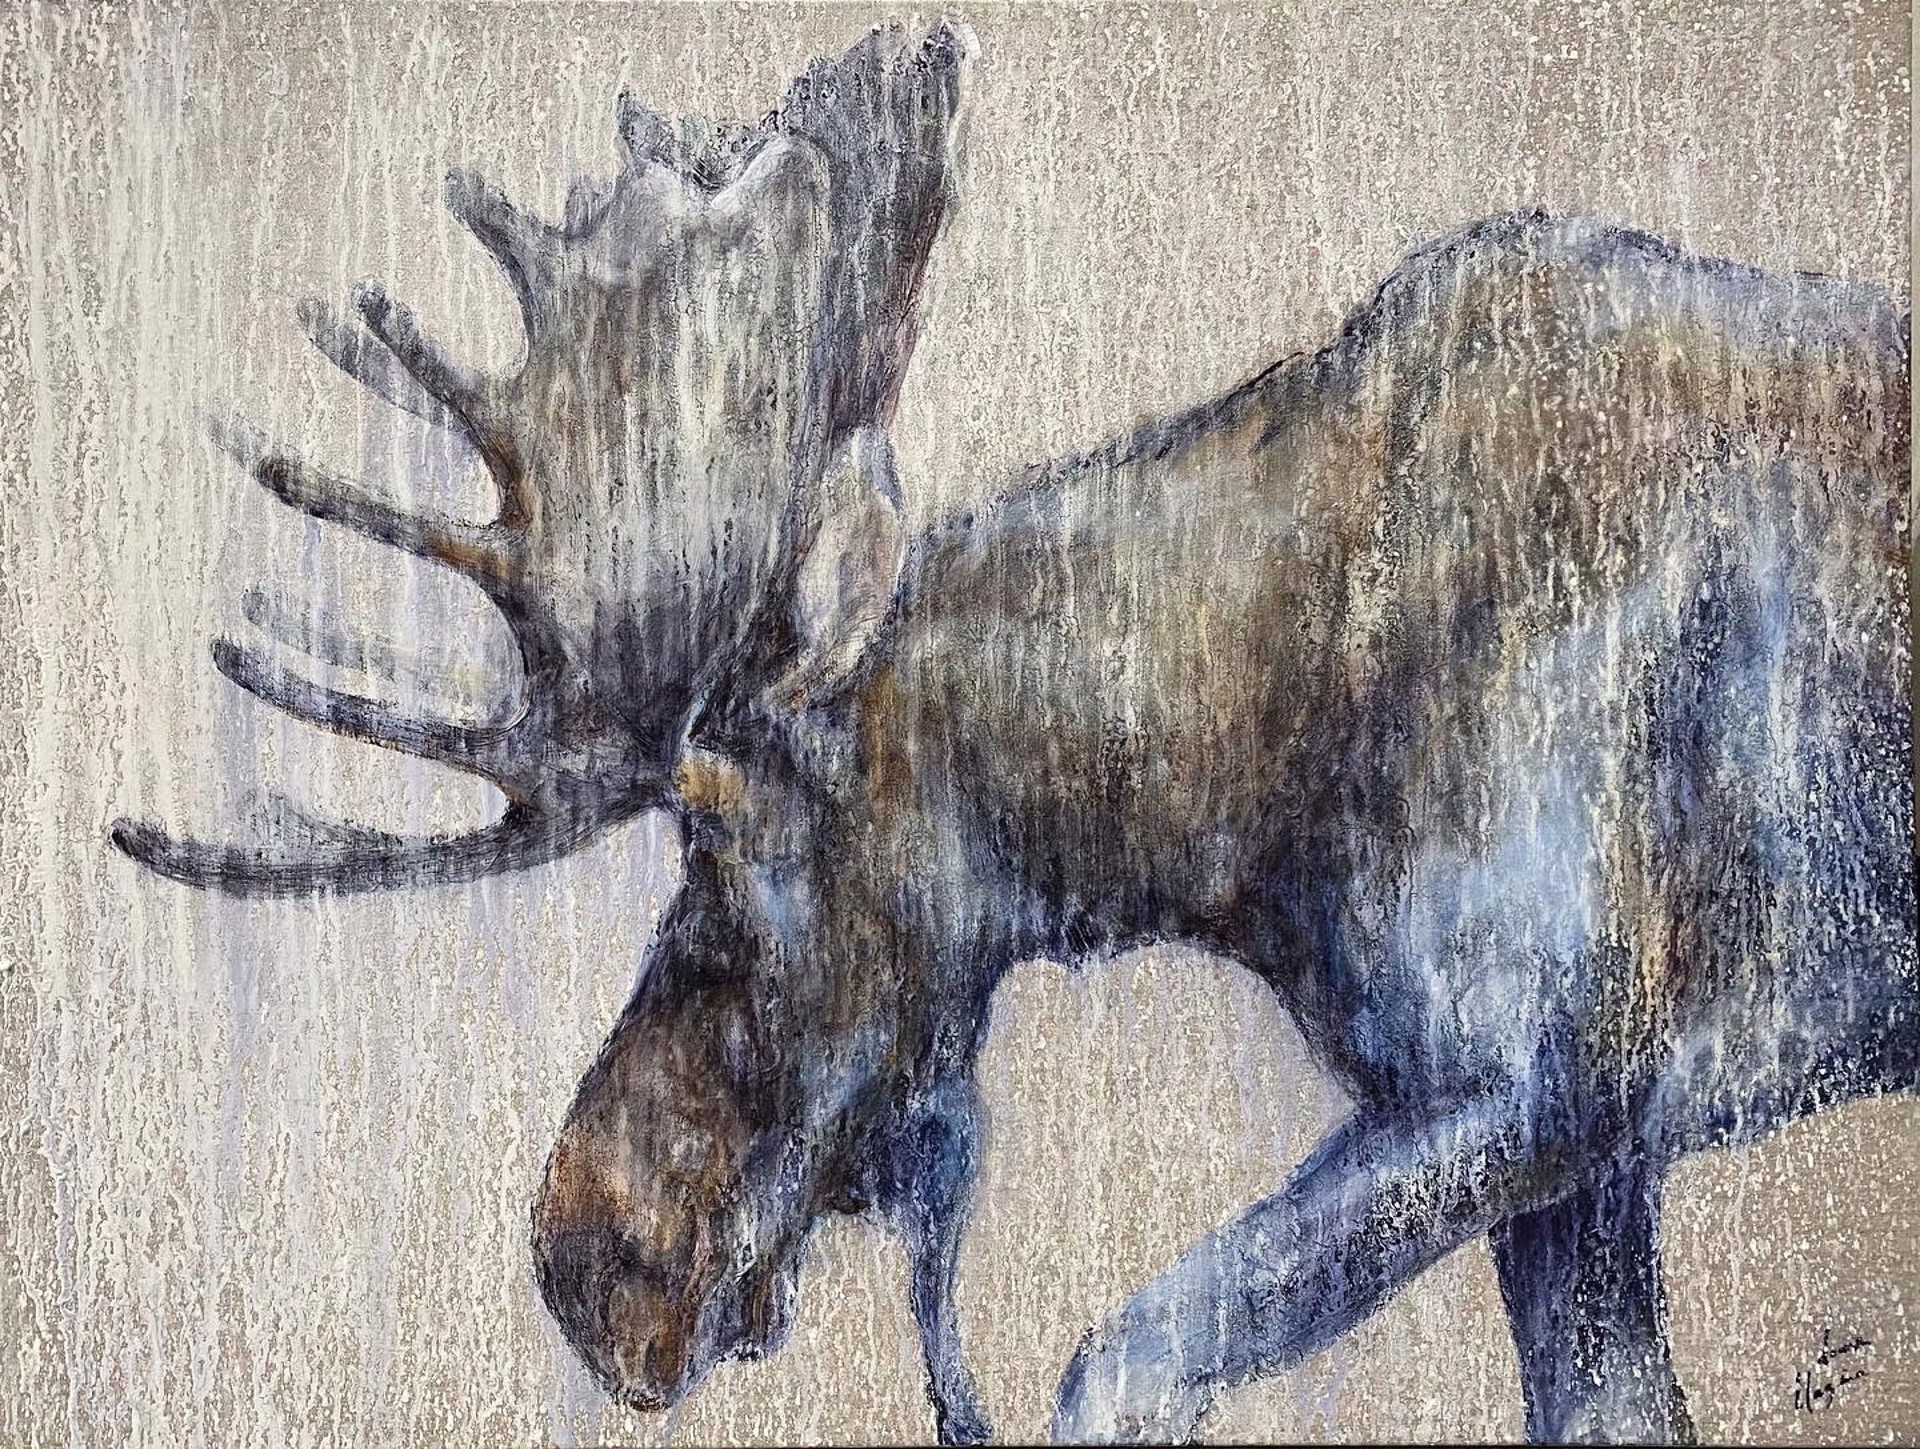 Original Oil Painting Featuring A Moose In Profile With Exposed Linen Background And White Dripping Details